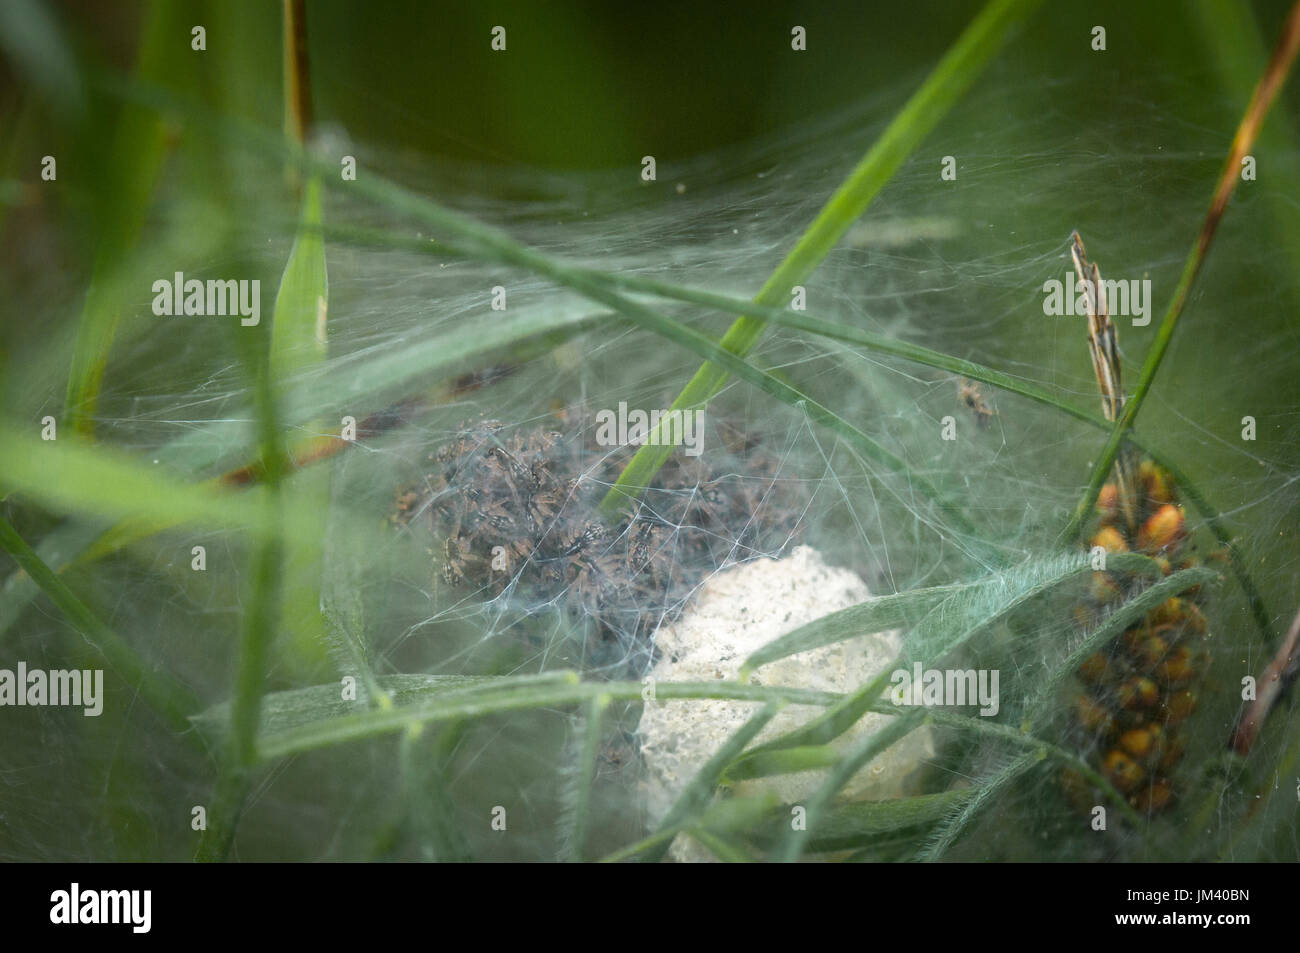 A close up image of a Labyrinth Spiders, Angelena labyrinthica, nest full of spiderlings, taken at Heysham Nature Reserve, Lancashire, England Stock Photo